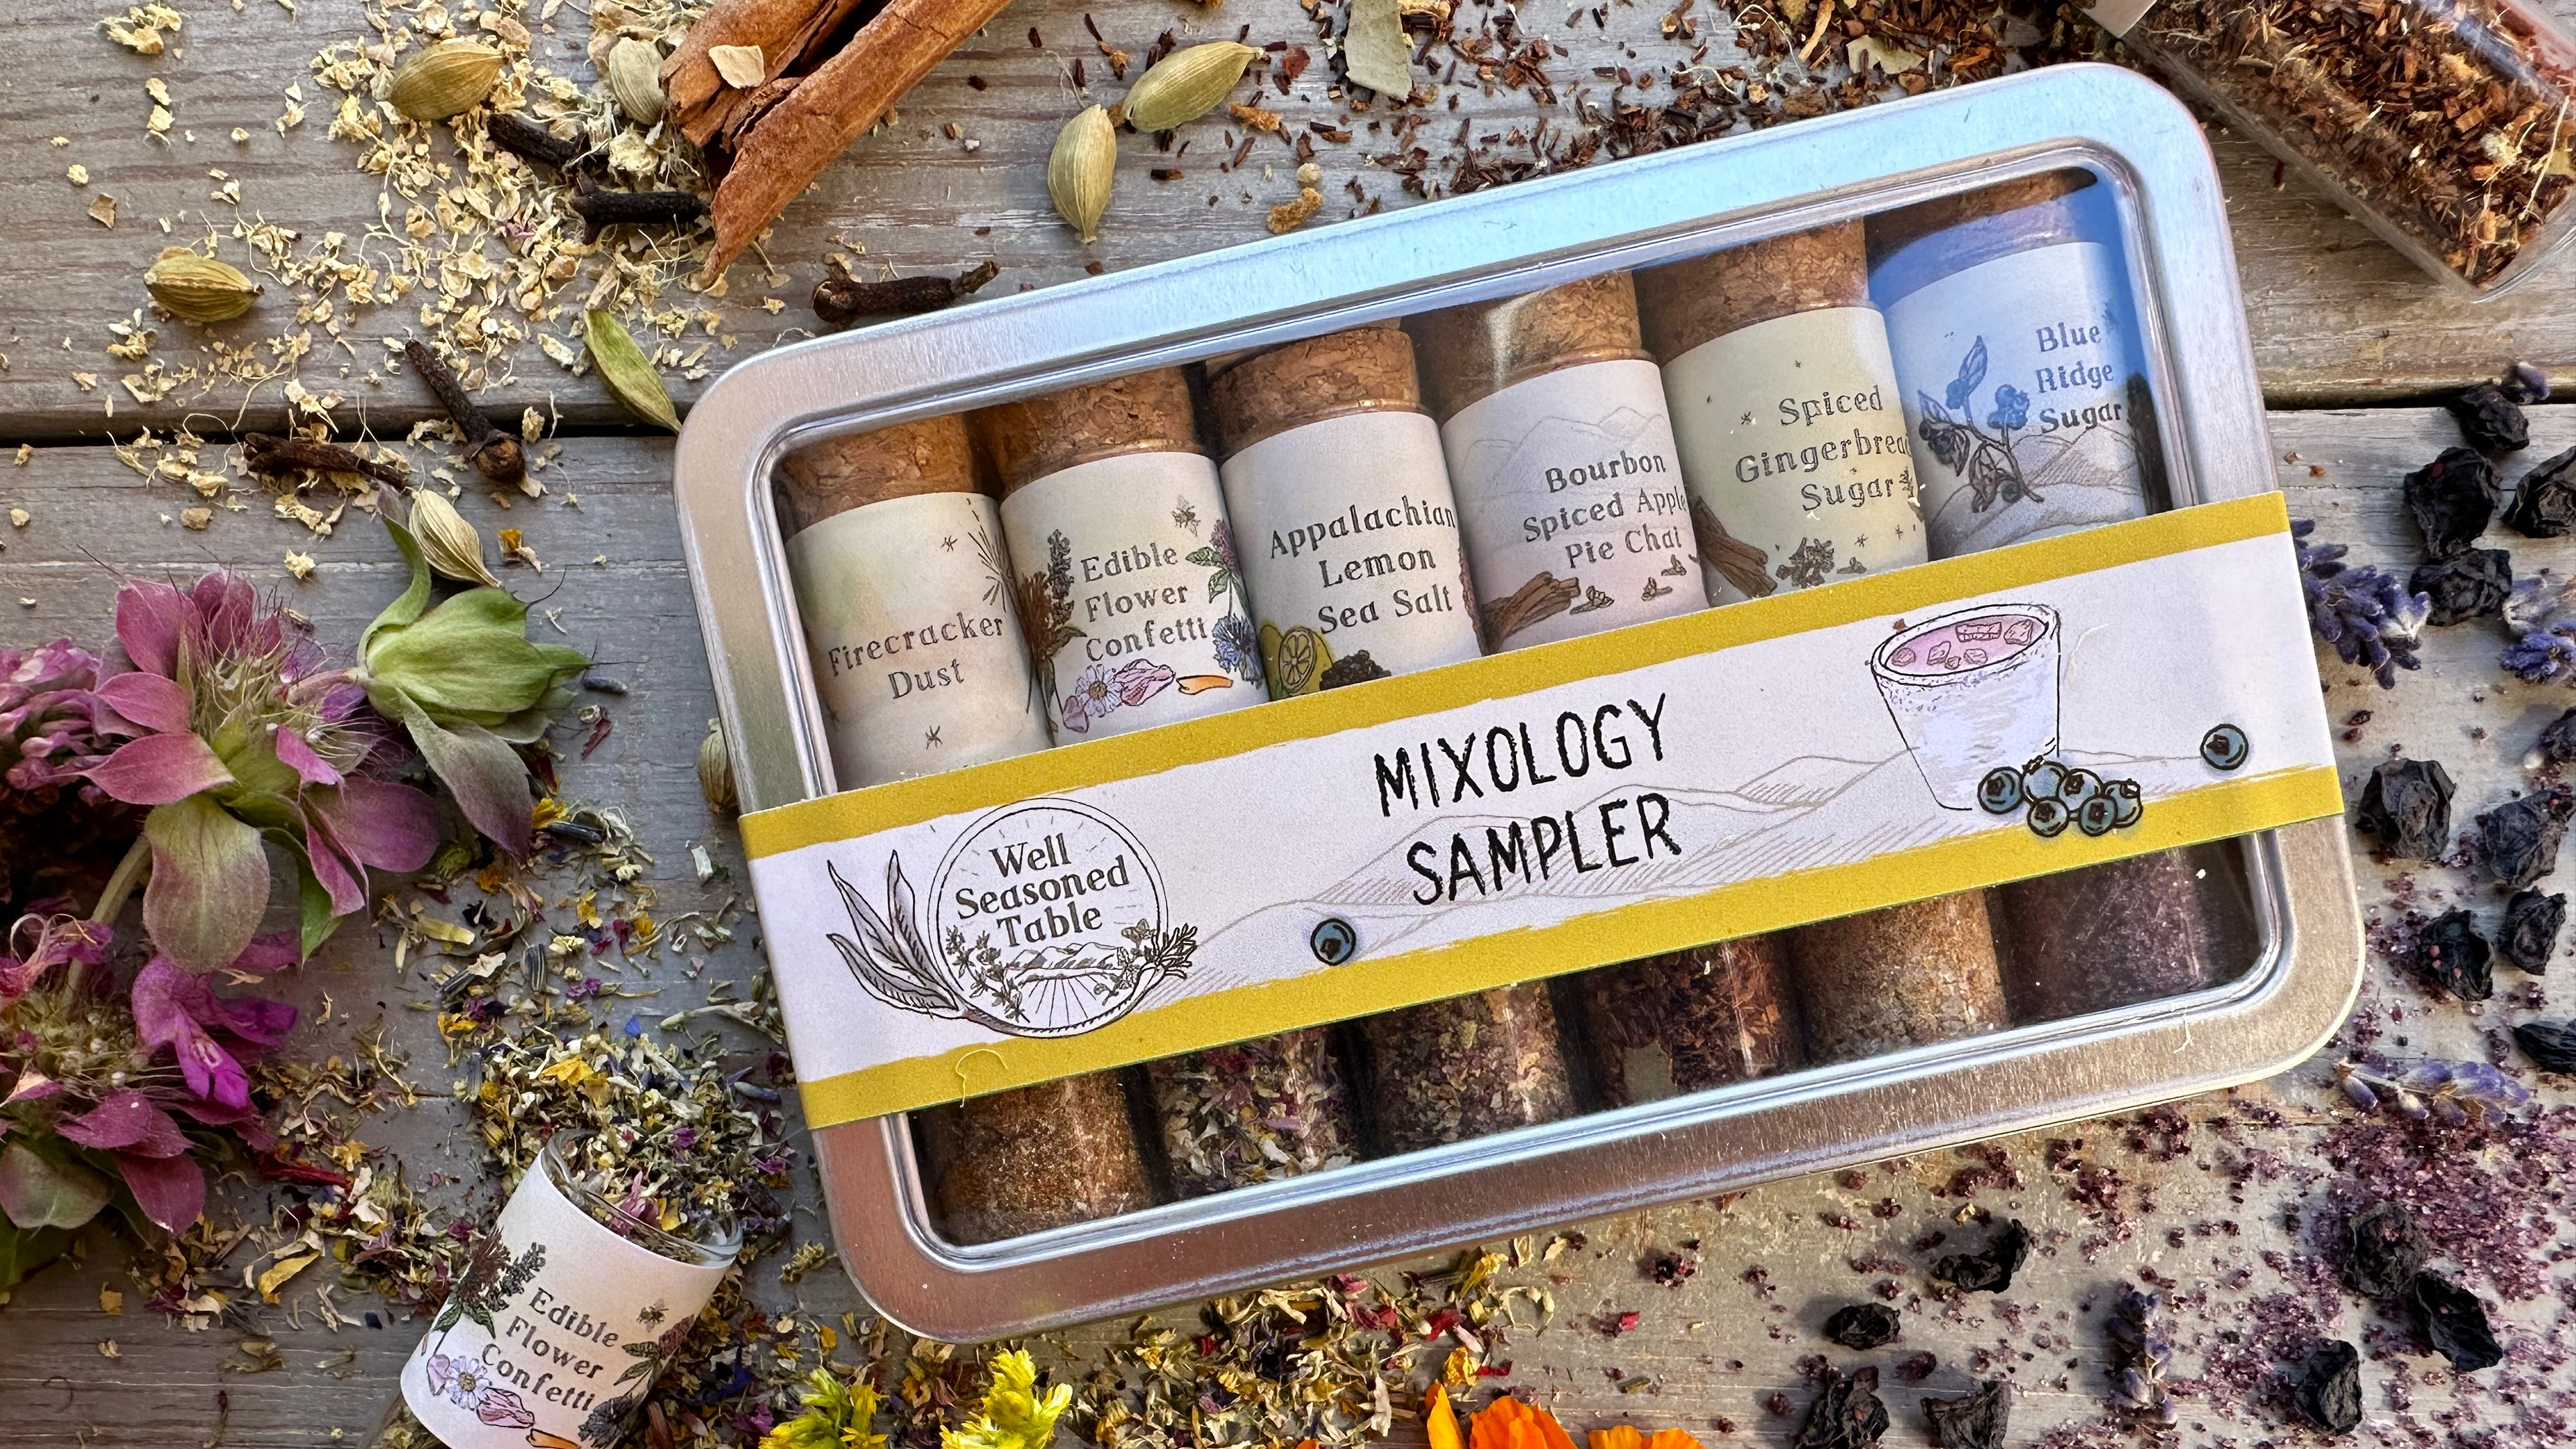 A sampler tin of vials of spices from Well Seasoned Table on a wooden background with organic dried fruit and flowers around it.